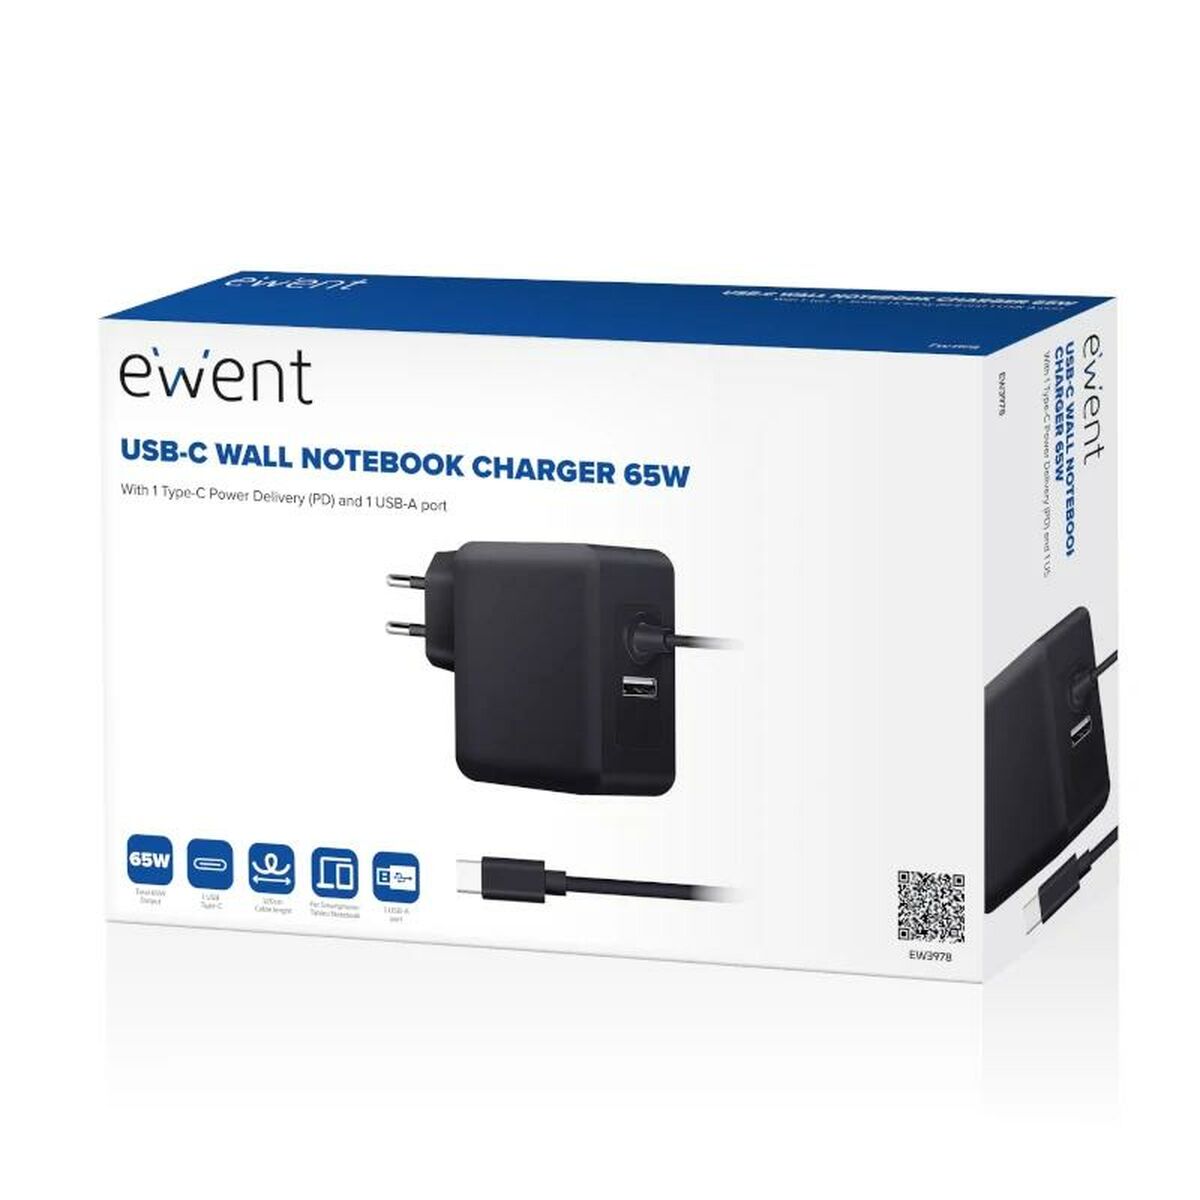 Laptop Charger Ewent EW3978 65 W